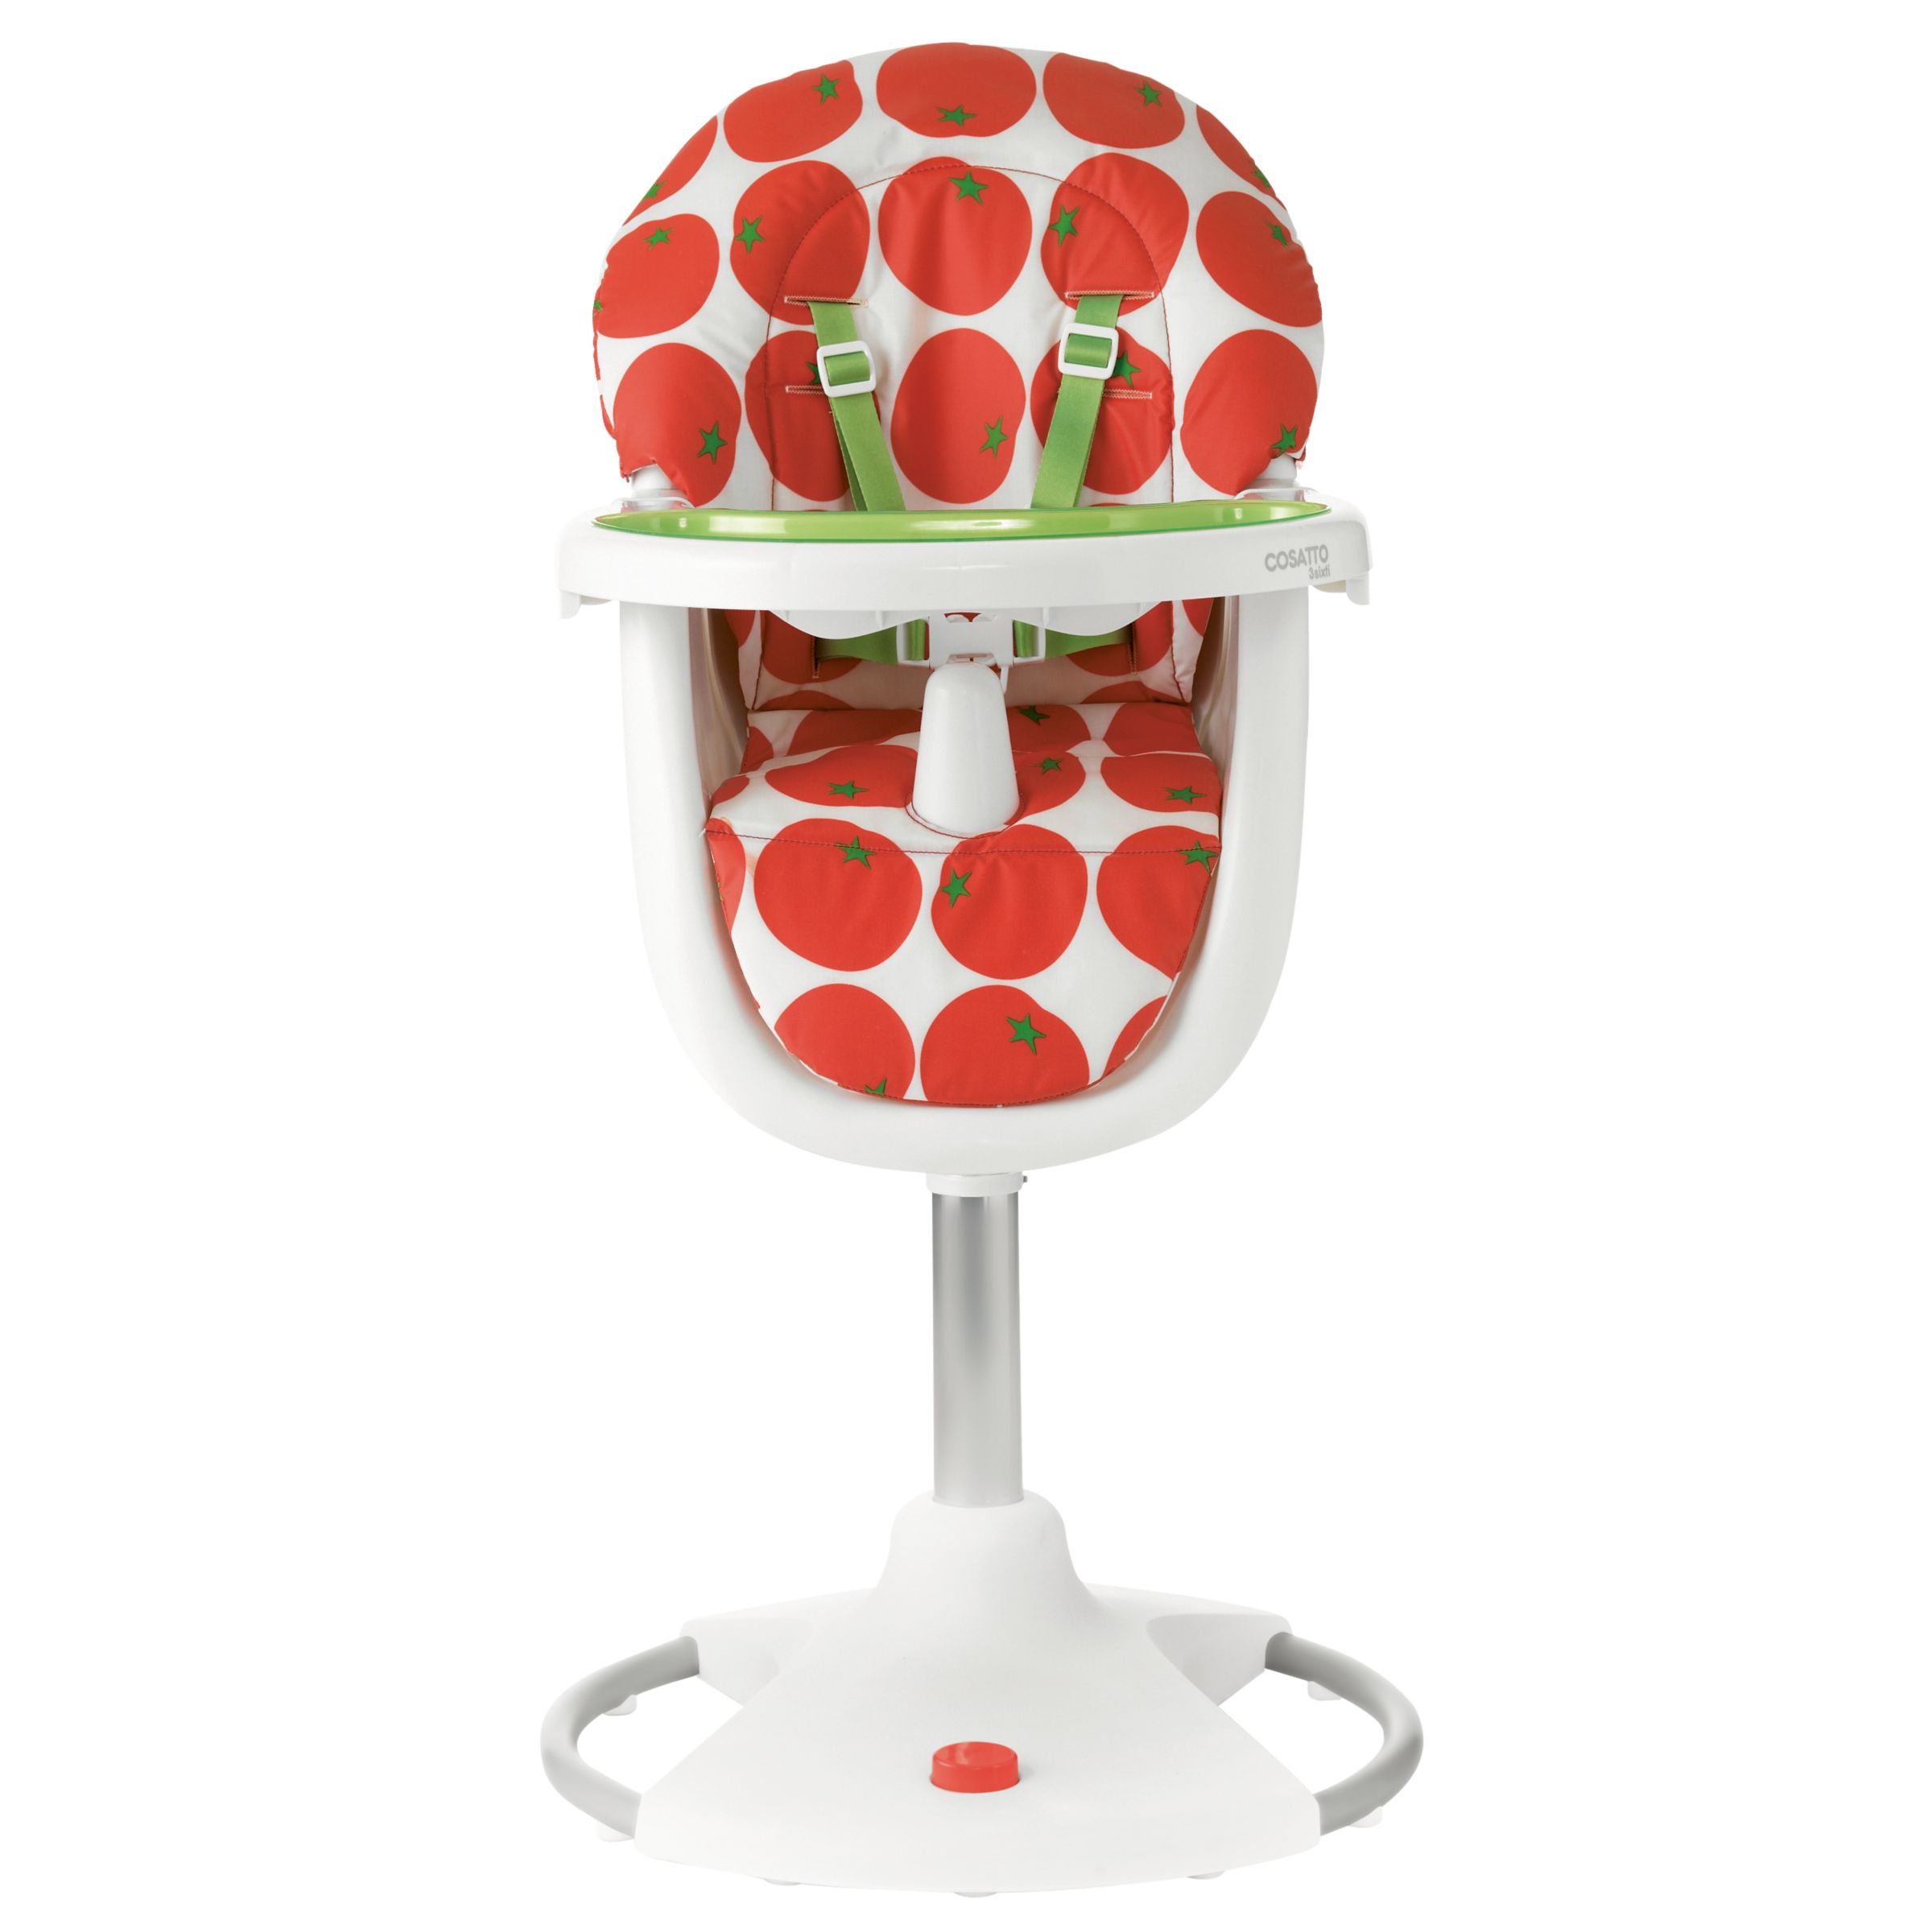 Cosatto 3Sixti Tomato Print Highchair, Red at John Lewis